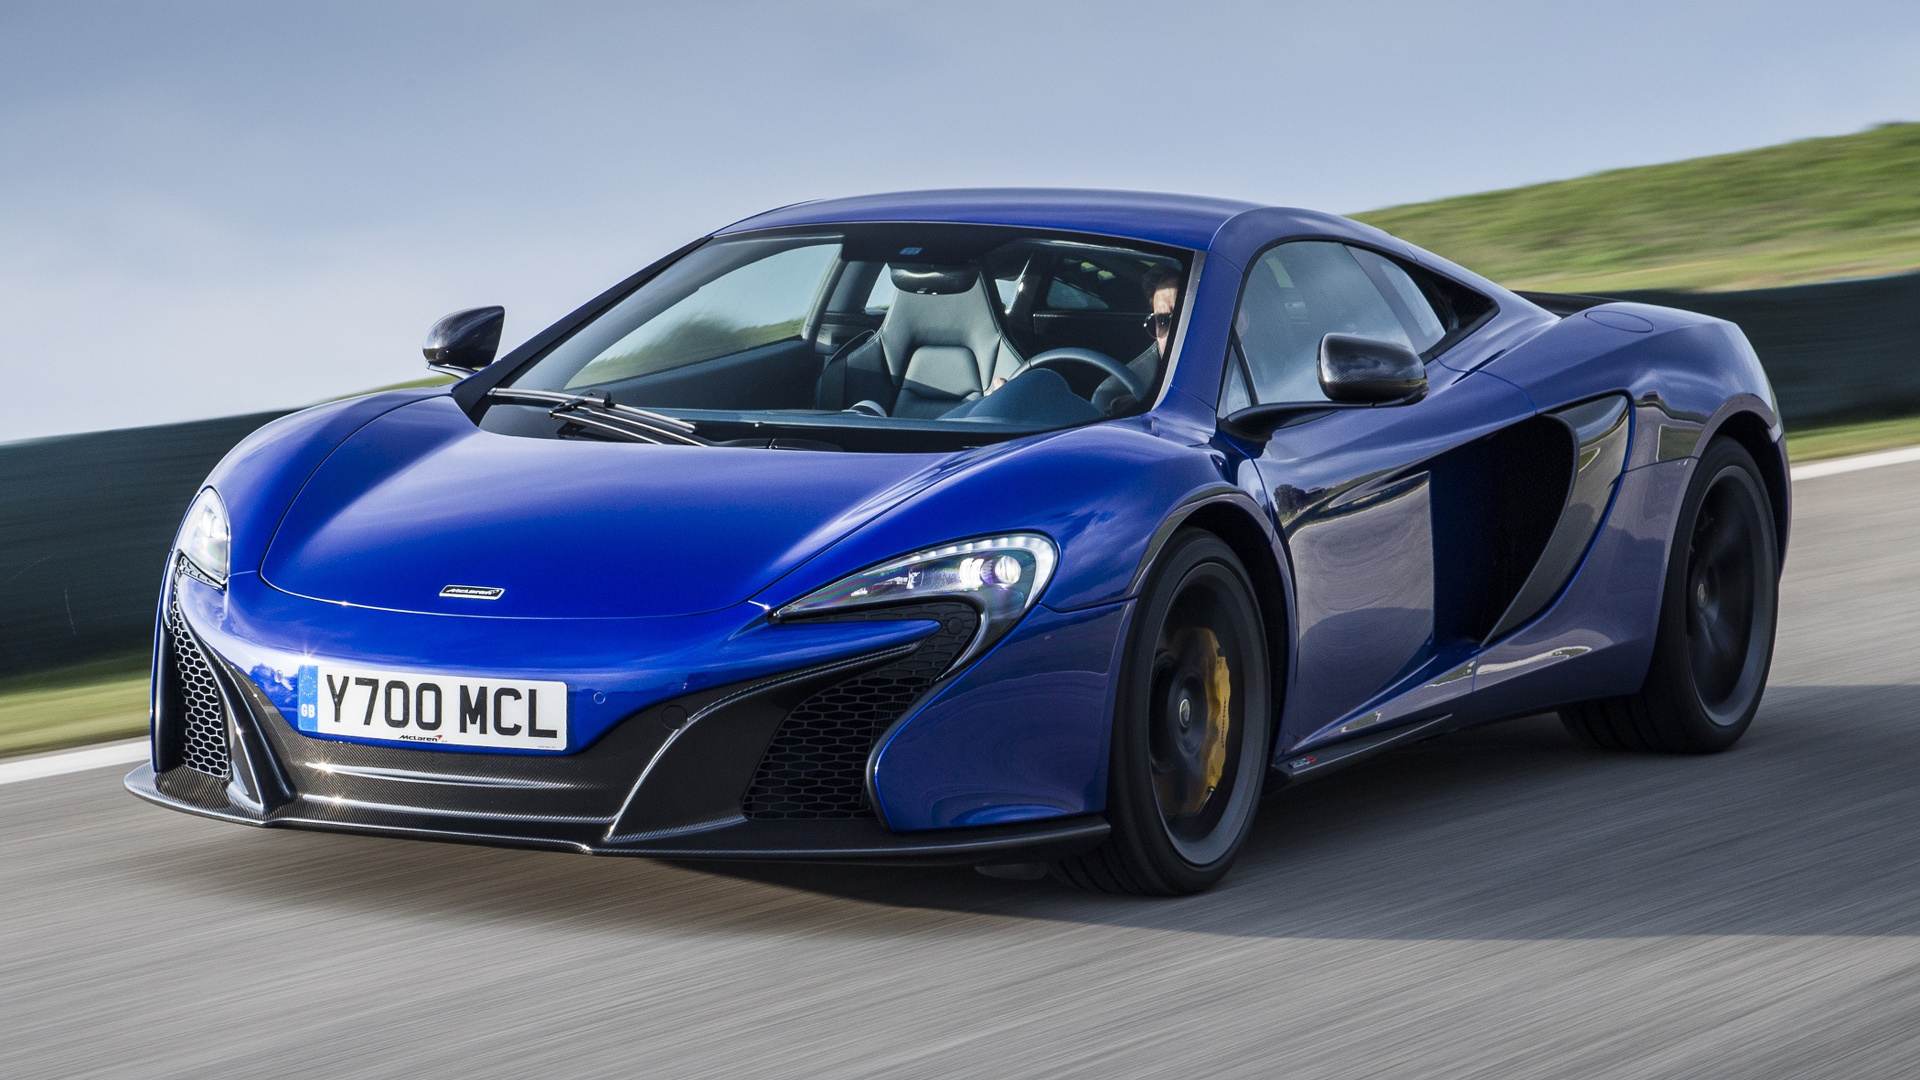 McLaren 650S Coupe, Coupe excellence, Track-inspired design, Striking wallpapers, 1920x1080 Full HD Desktop